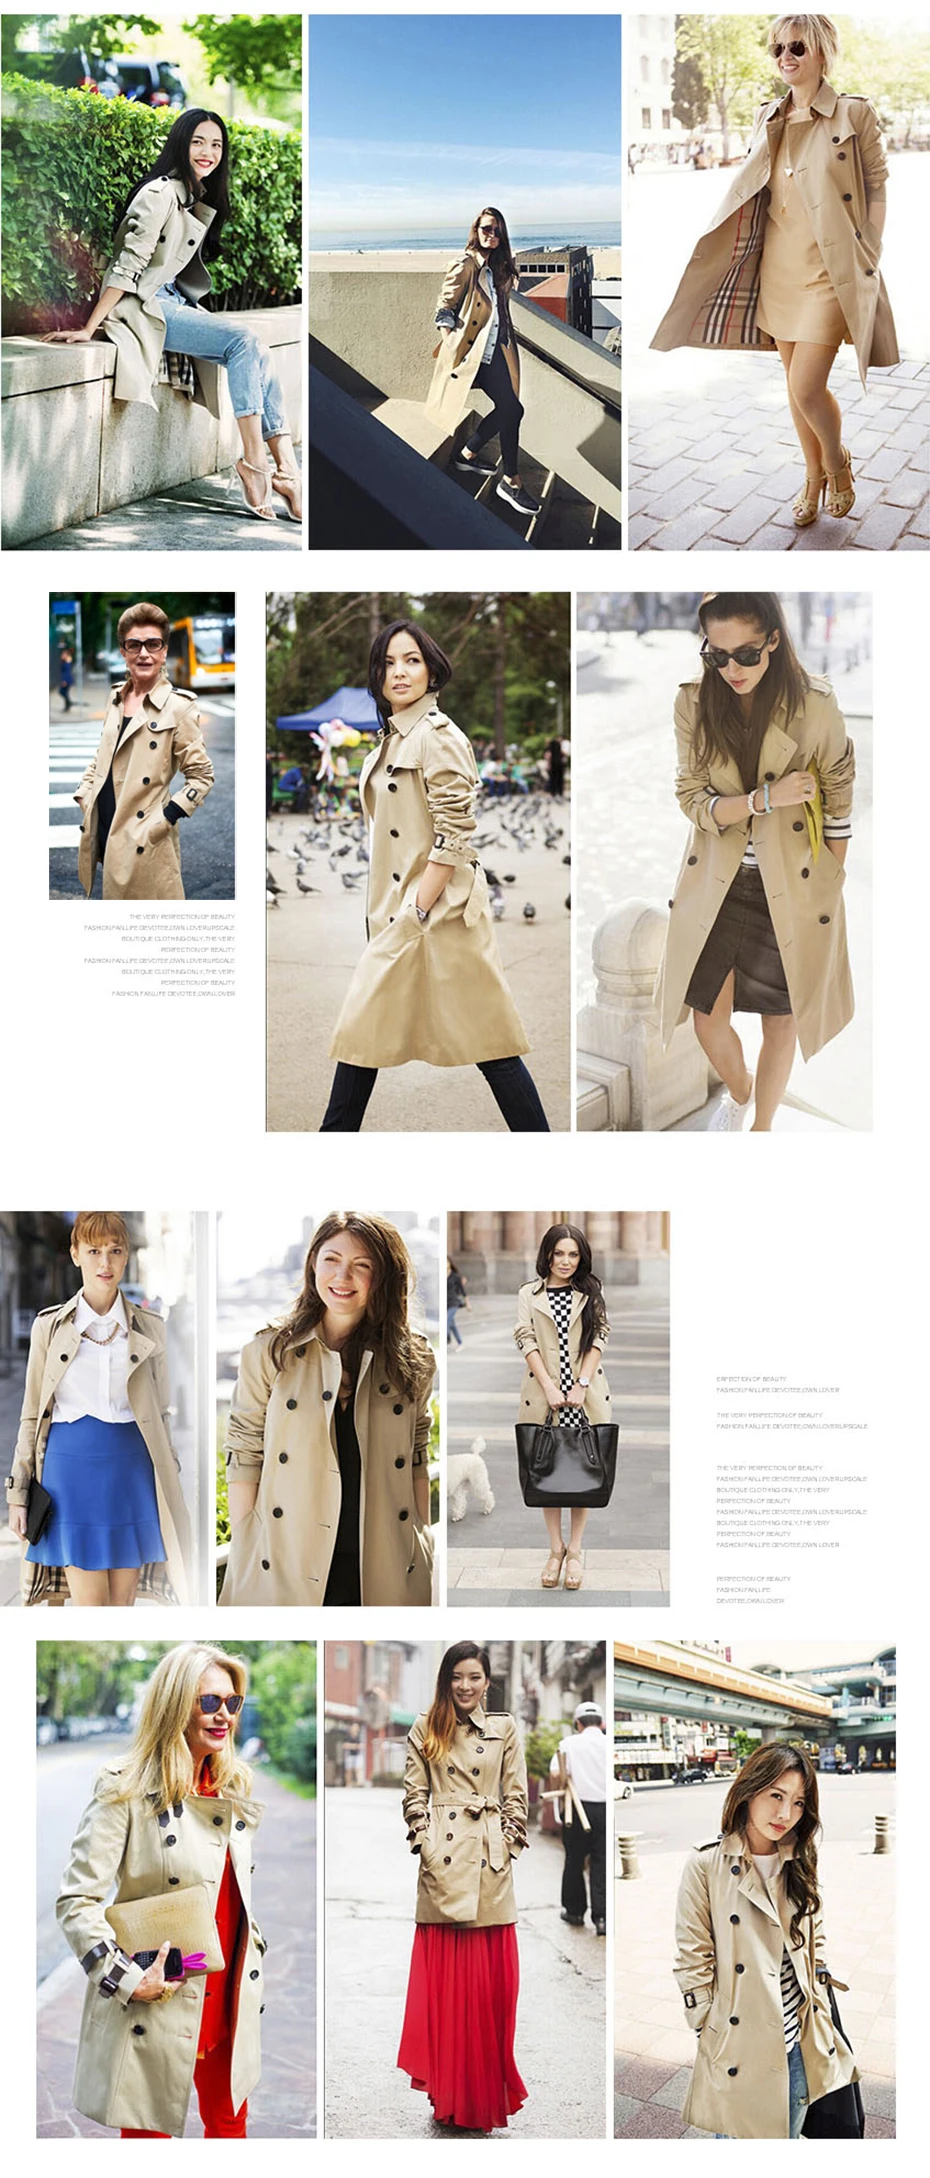 Top Quality 2022 New Autumn High Fashion Street Women Khaki Outerwear Jacket Female Classic The Mid-length Heritage Trench Coat long puffa coat